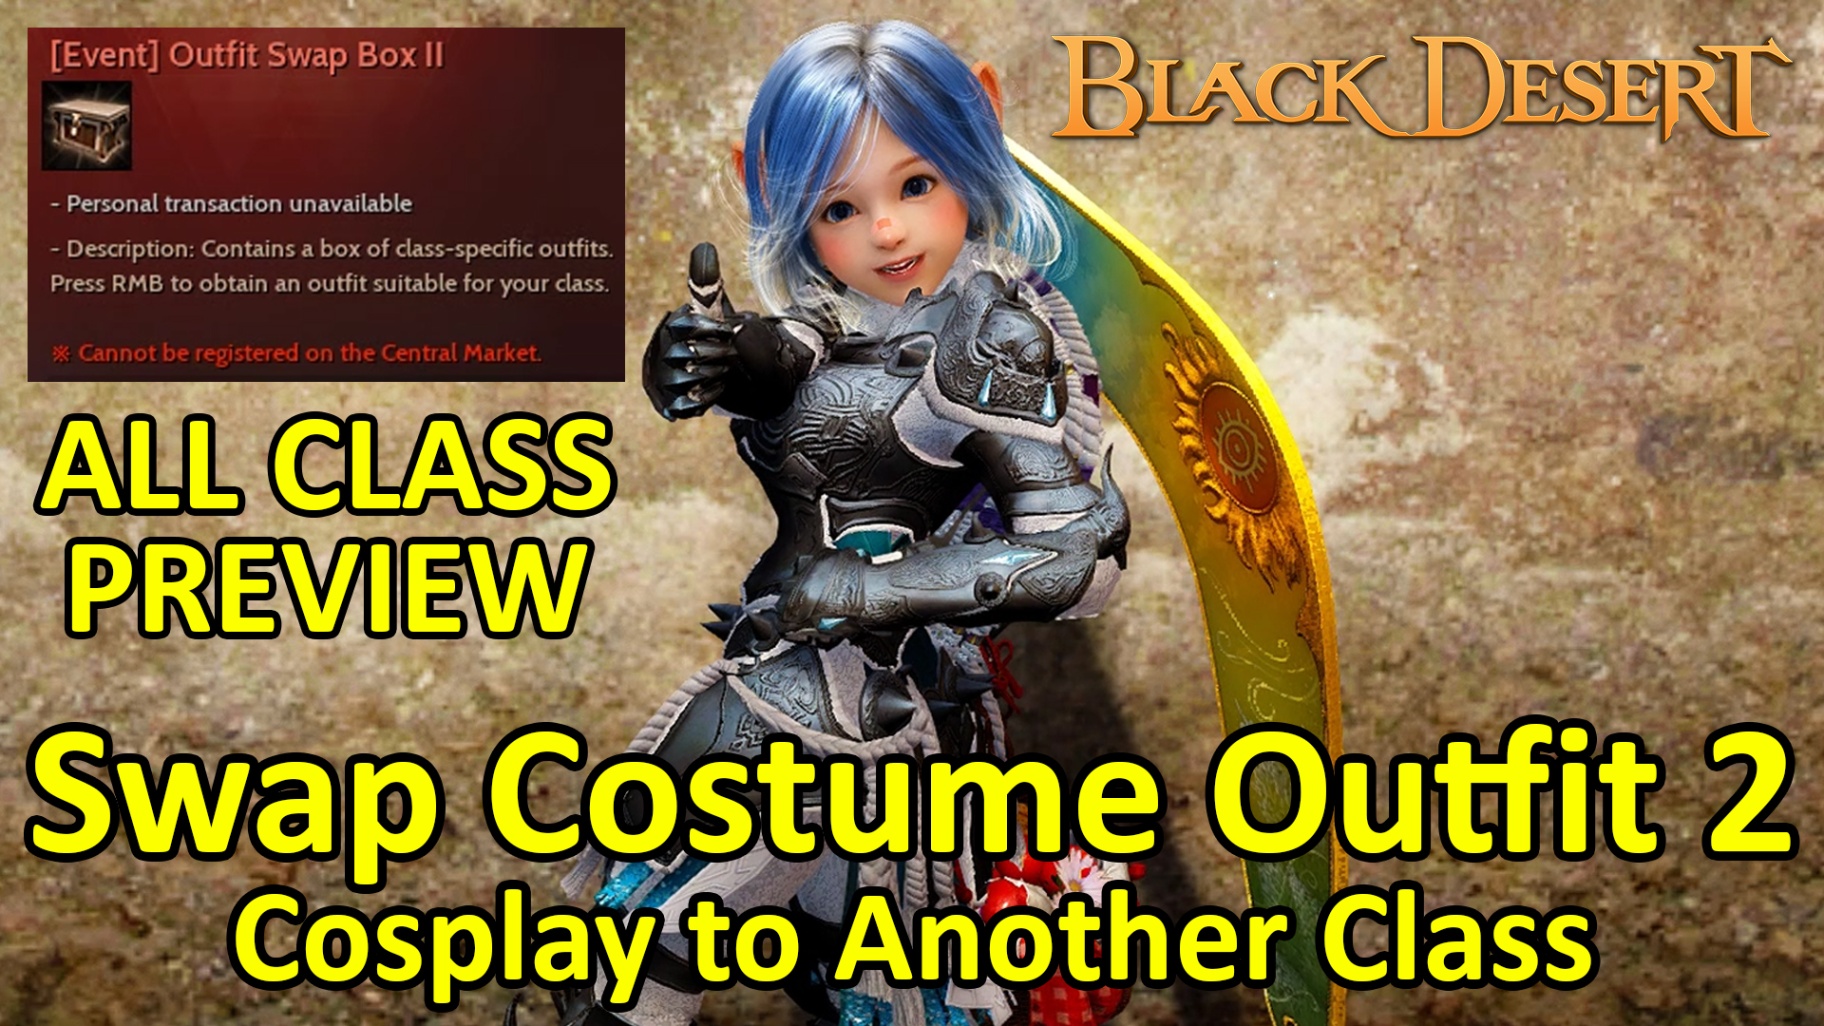 bdo exciting adventure outfit box Niche Utama Home Game Play] SWAP COSTUME OUTFIT Box  All Class Preview, Cosplay to